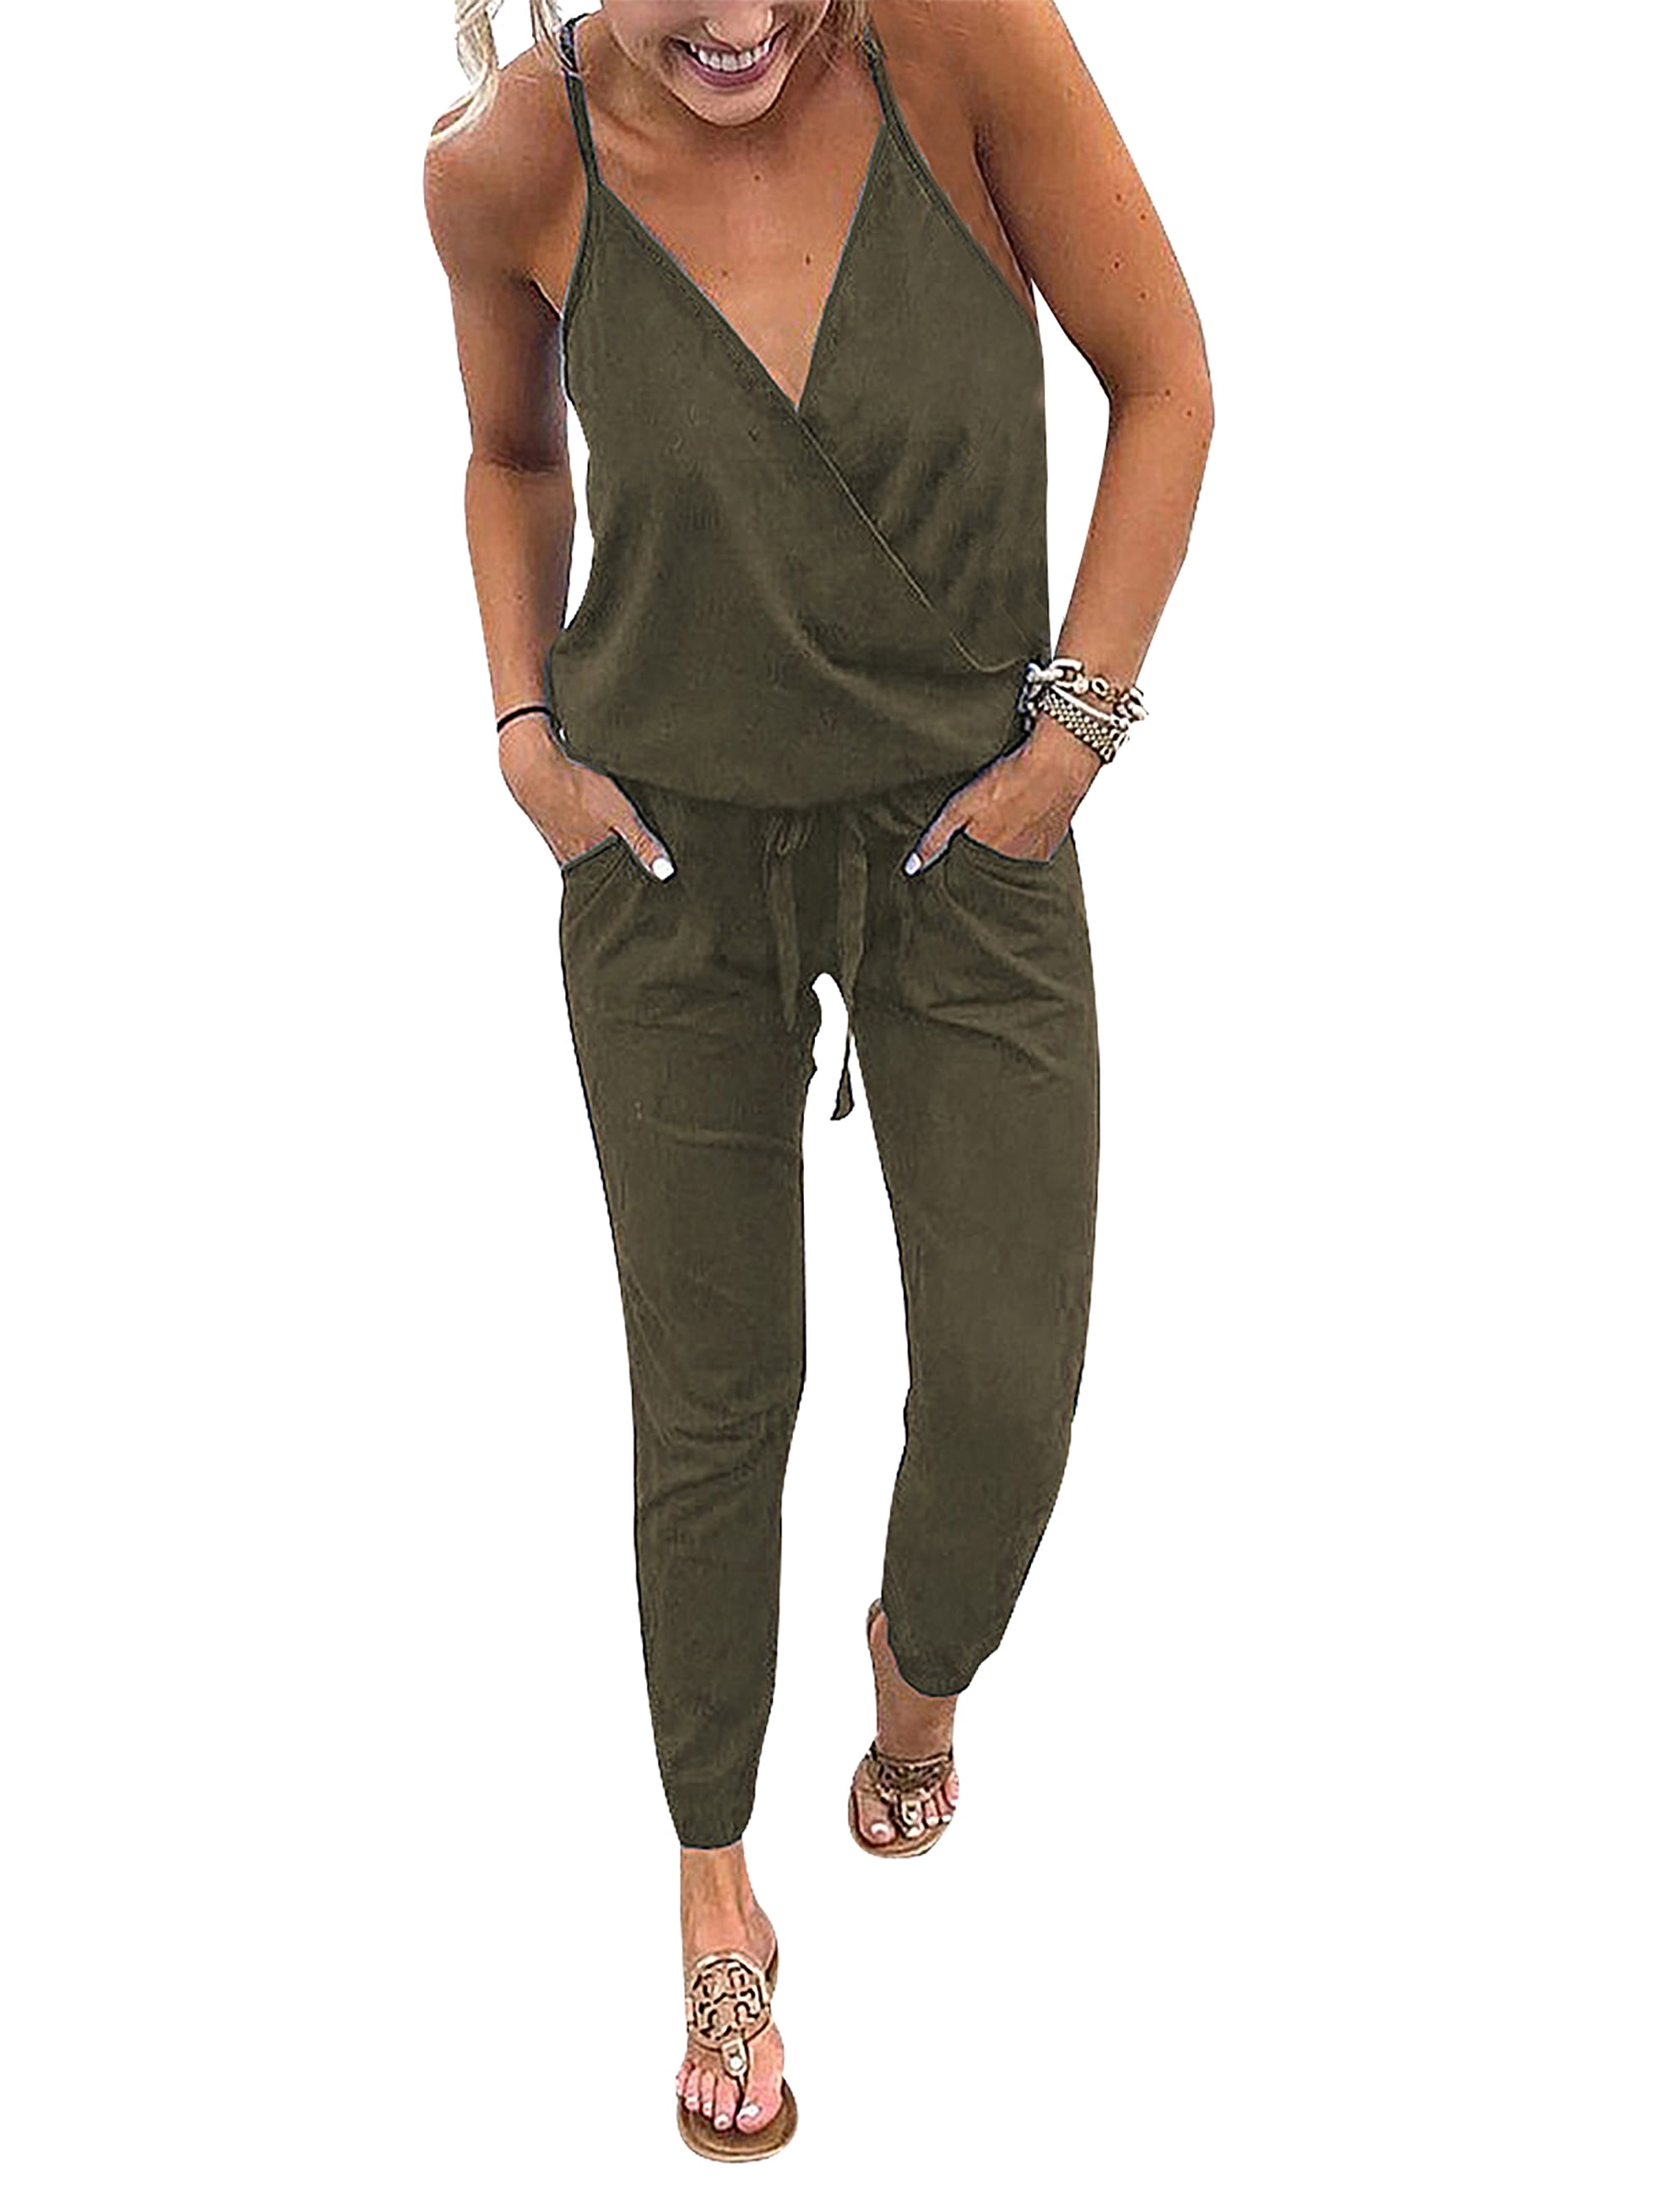 Adibosy Women’s Summer Romper Shorts Jumpsuits Rompers Solid Color Jumpsuit Outfits Plus Size Rompers for Women 